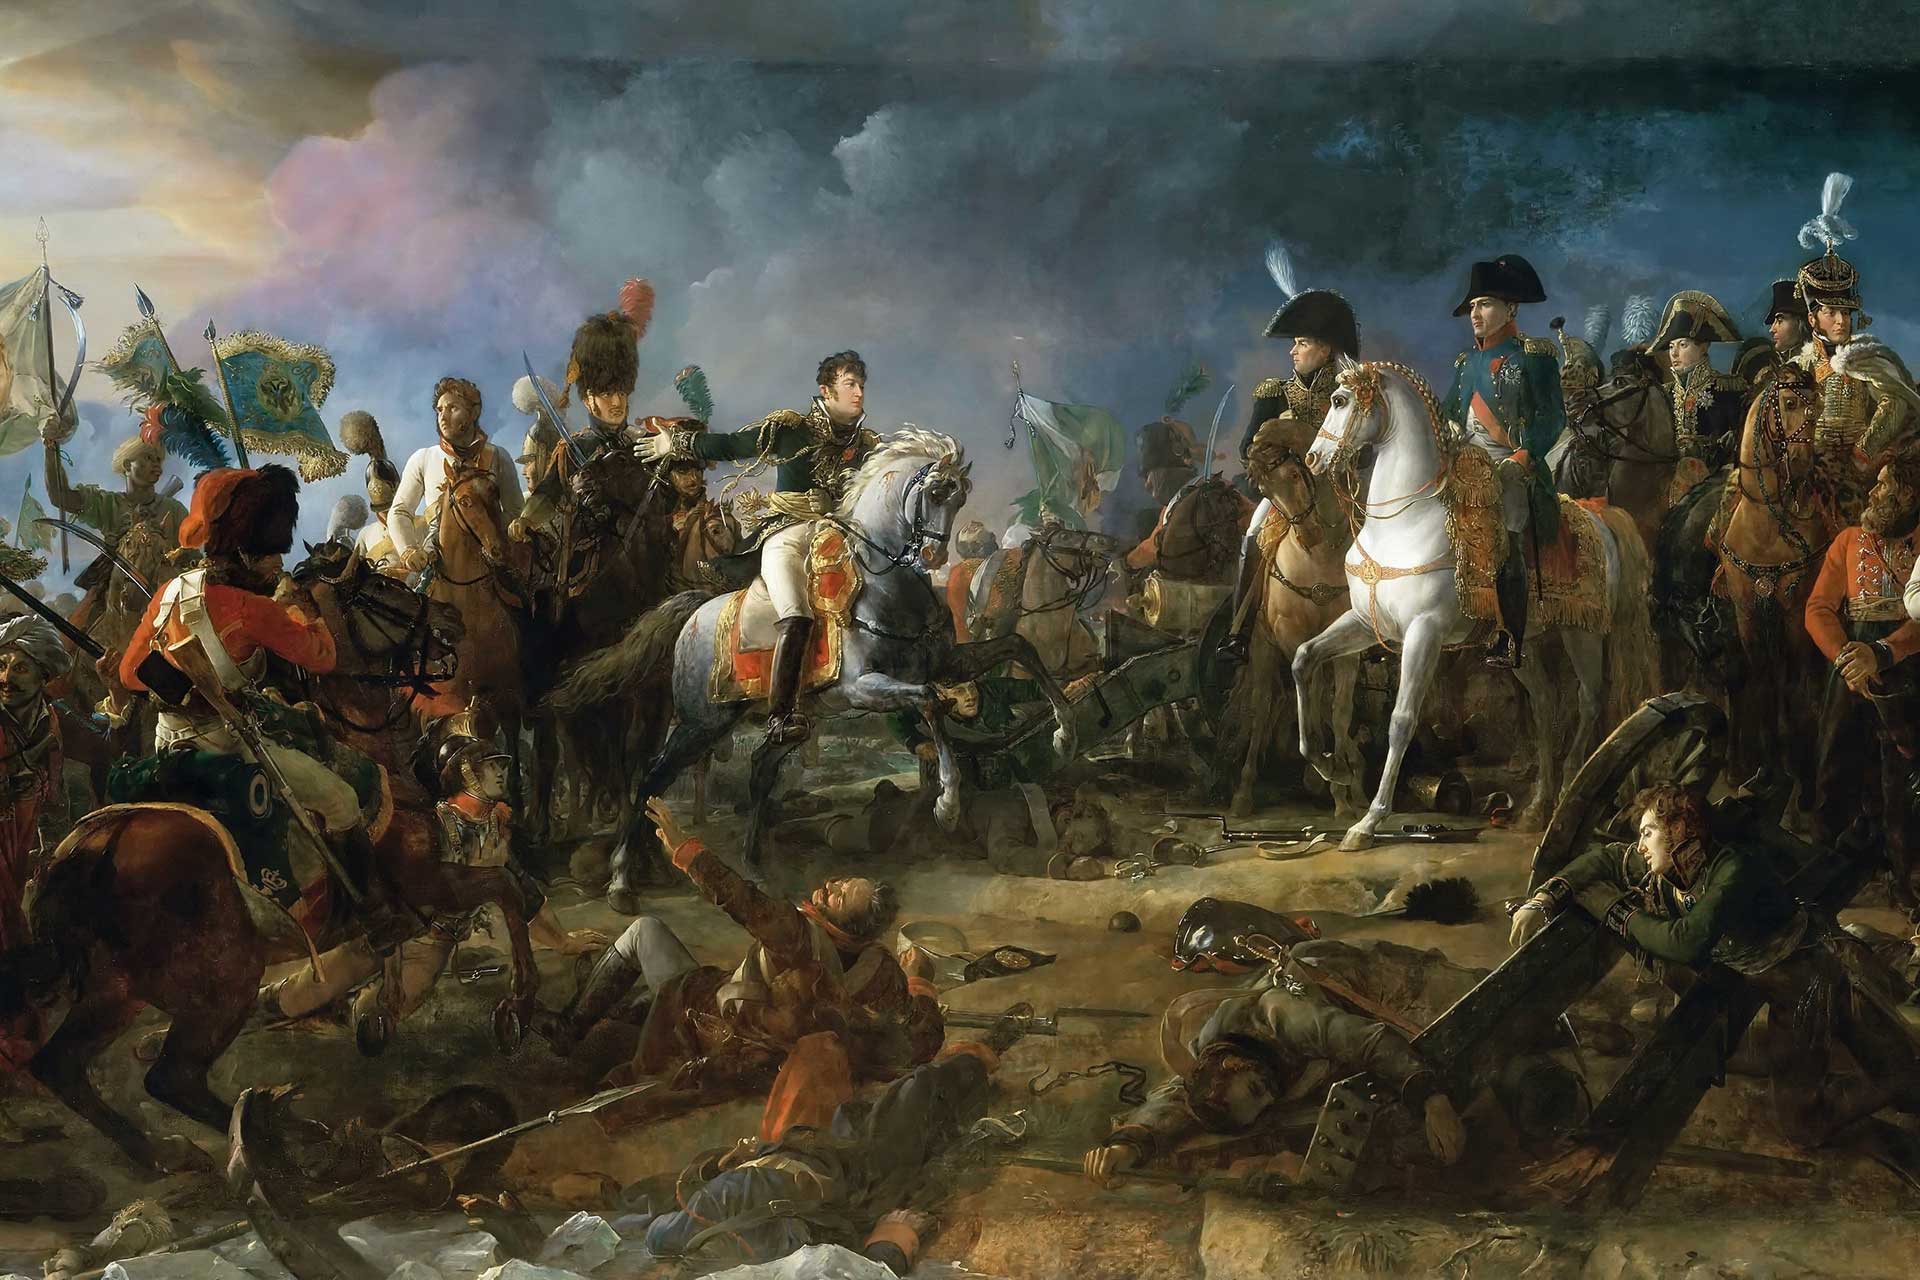 Napoleon's Greatest Military Victories and Defeats: A Tale of Genius and Overreach